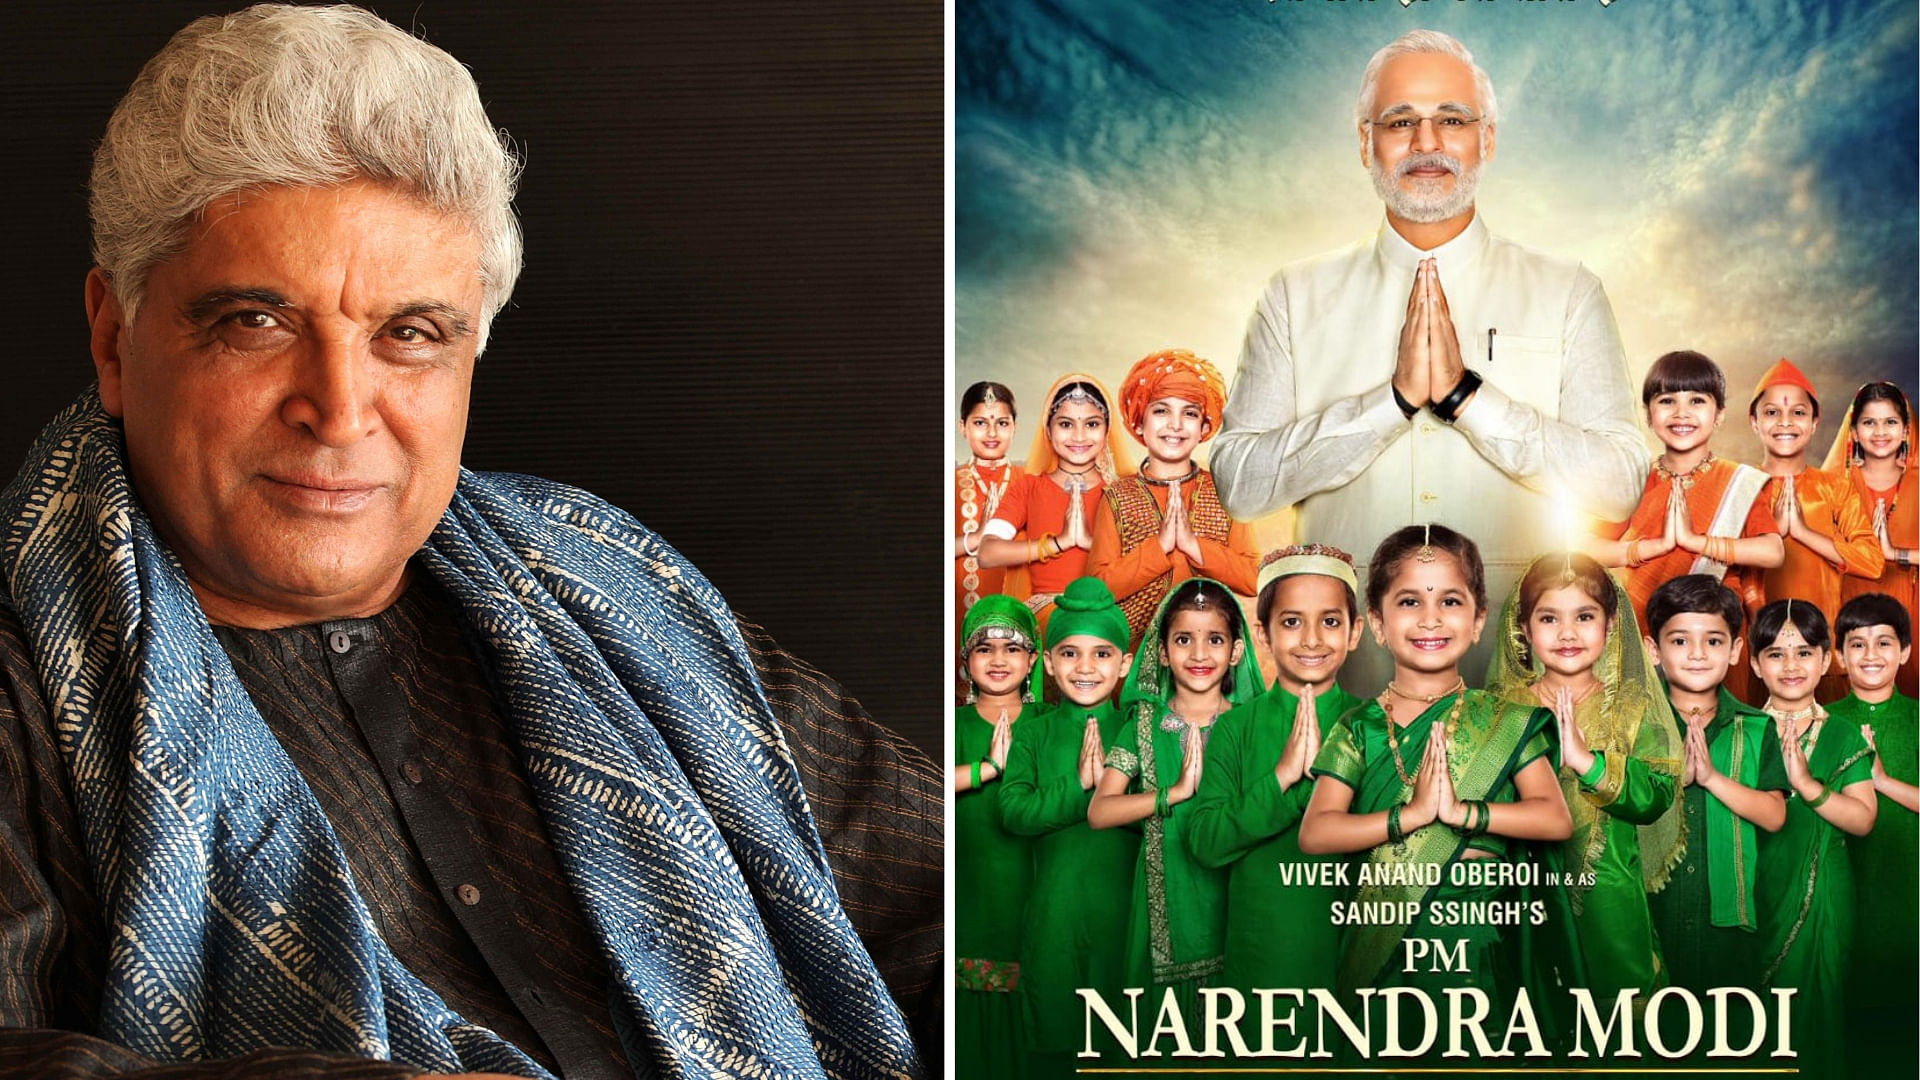 Javed Akhtar has claimed he is not part of <i>PM Narendra Modi</i>.